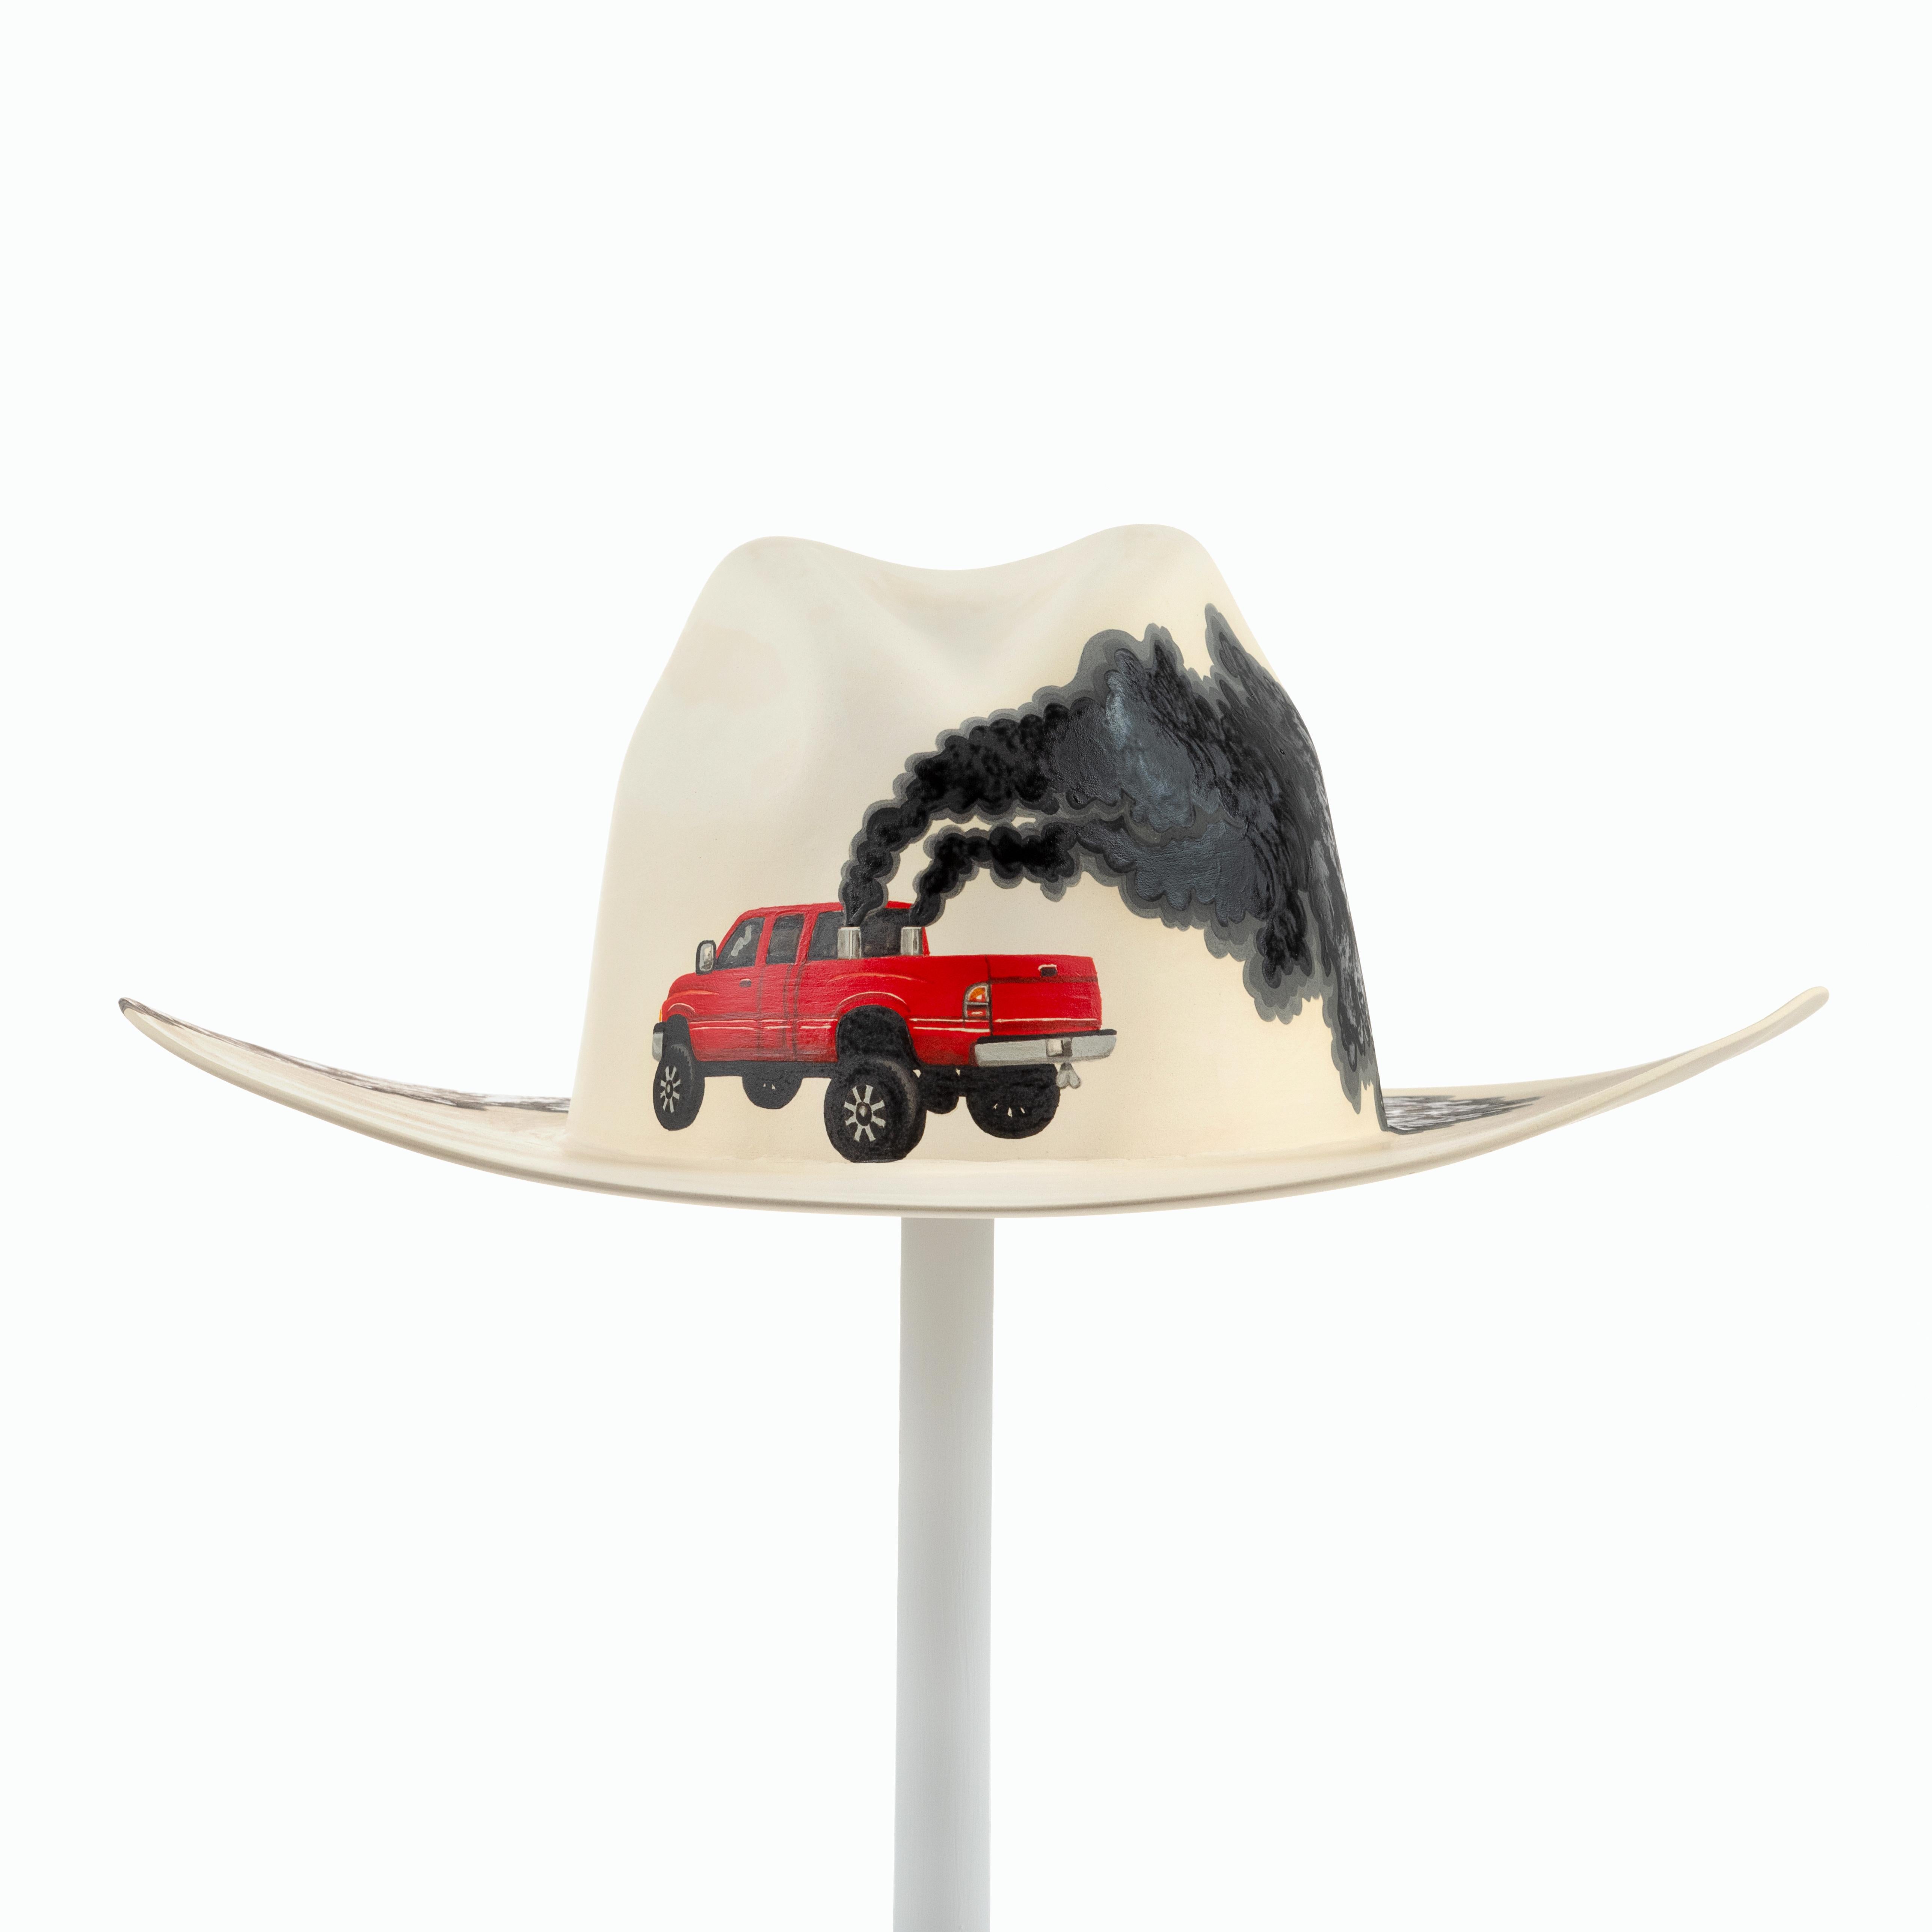 This is a ceramic cowboy hat. 